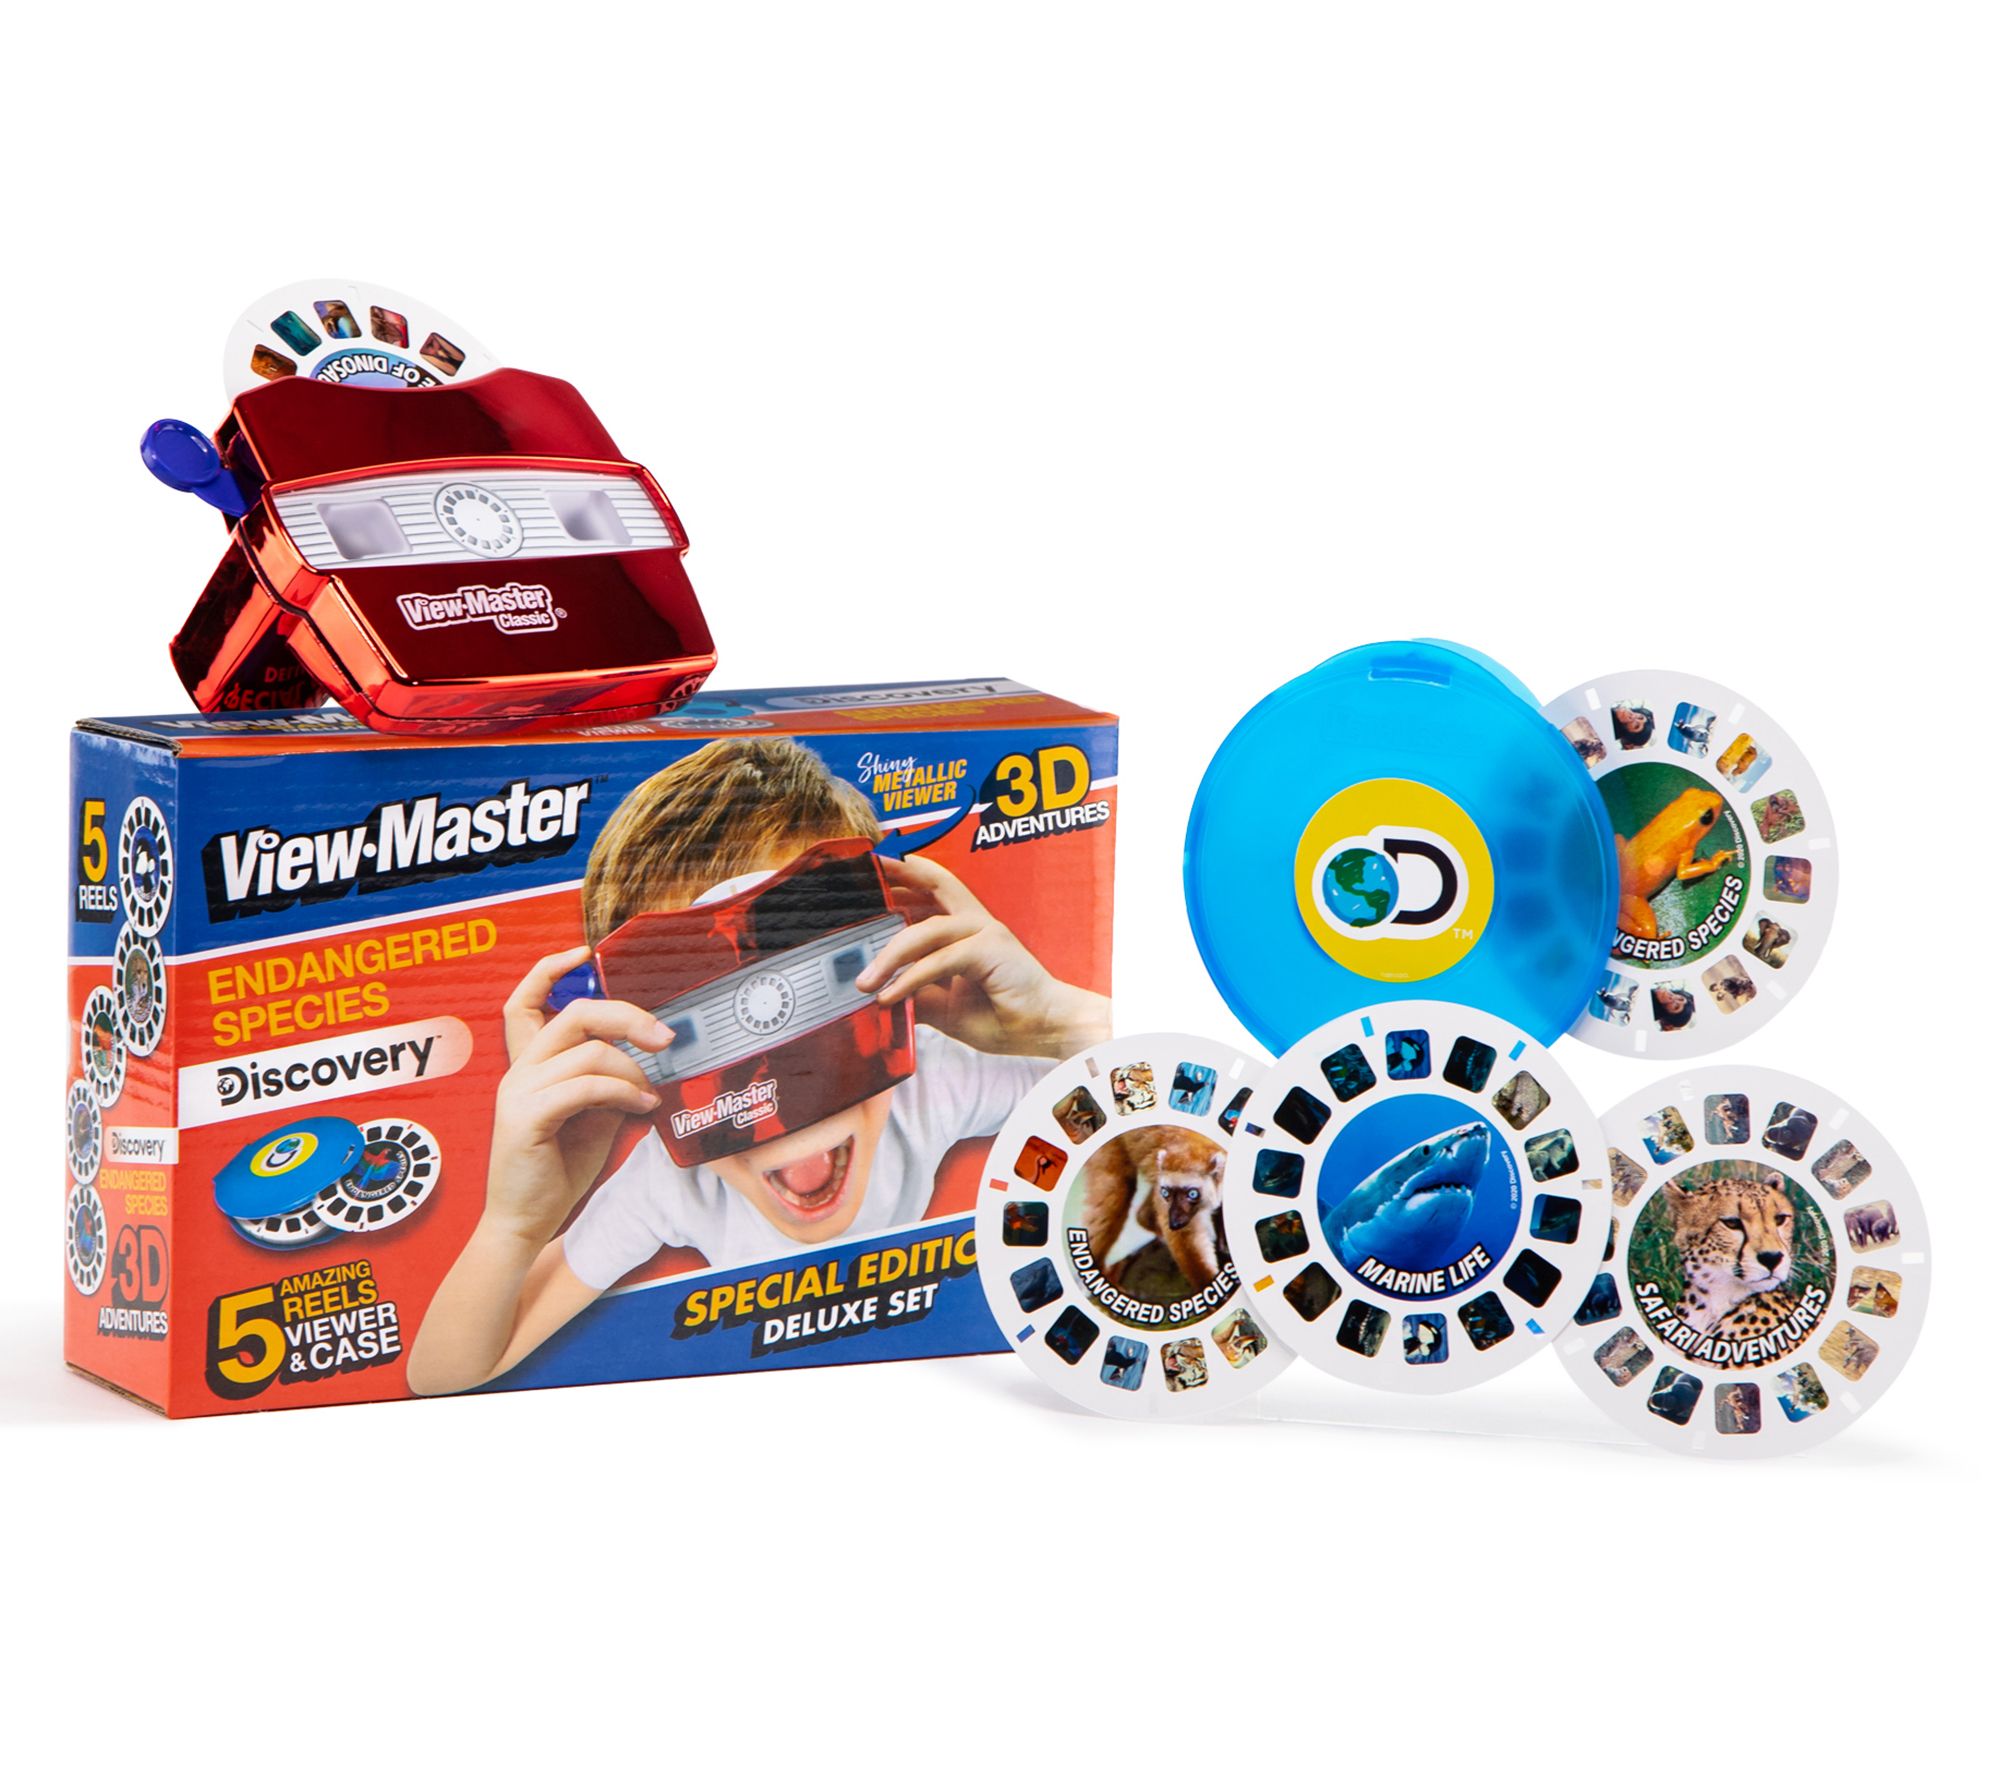 View Master Classic Viewer With Reels, View Master Classic Reels